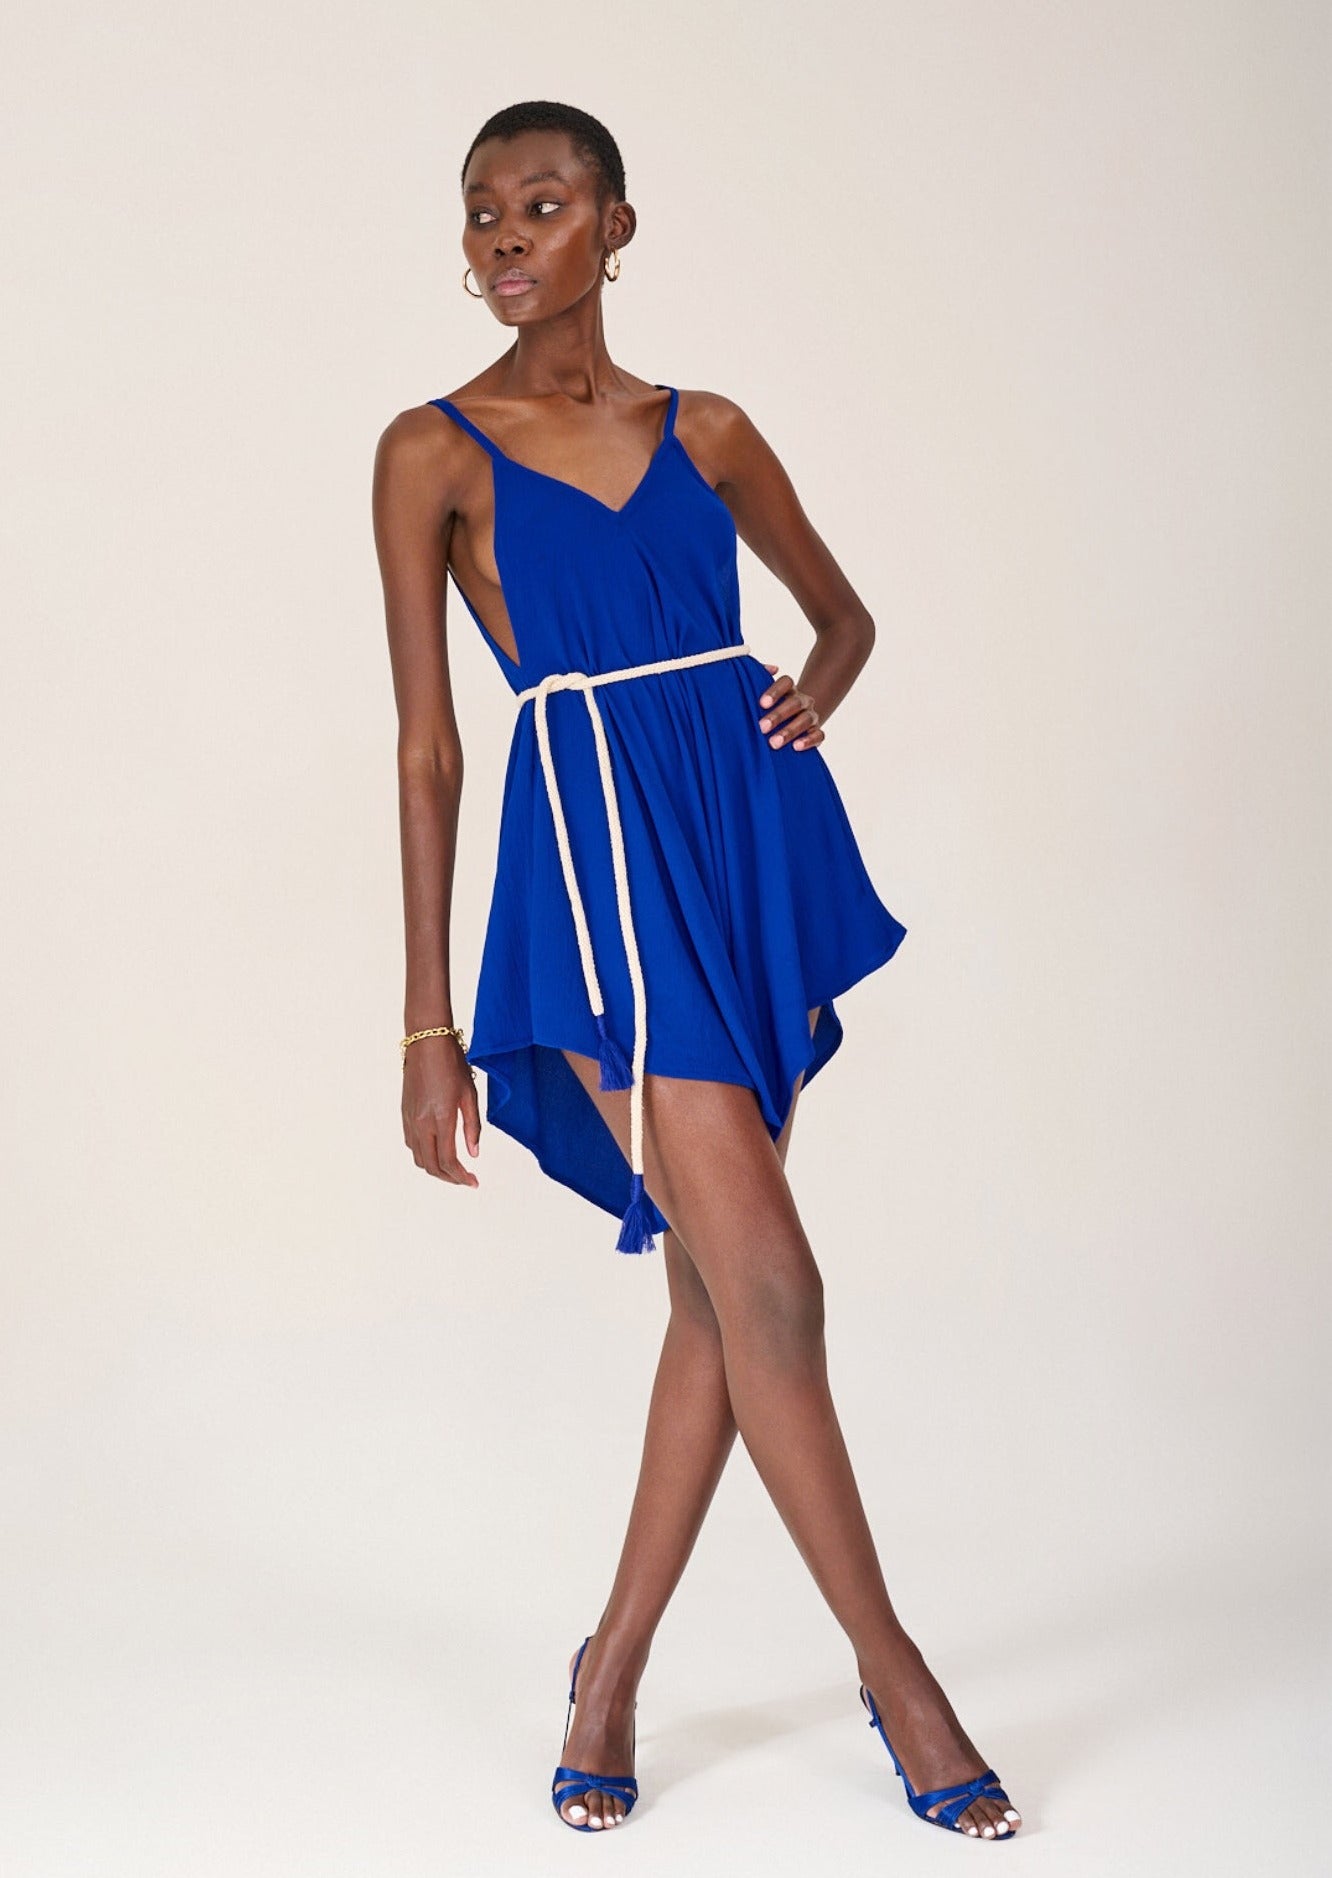 Kloofstreet Playsuit by Kahindo